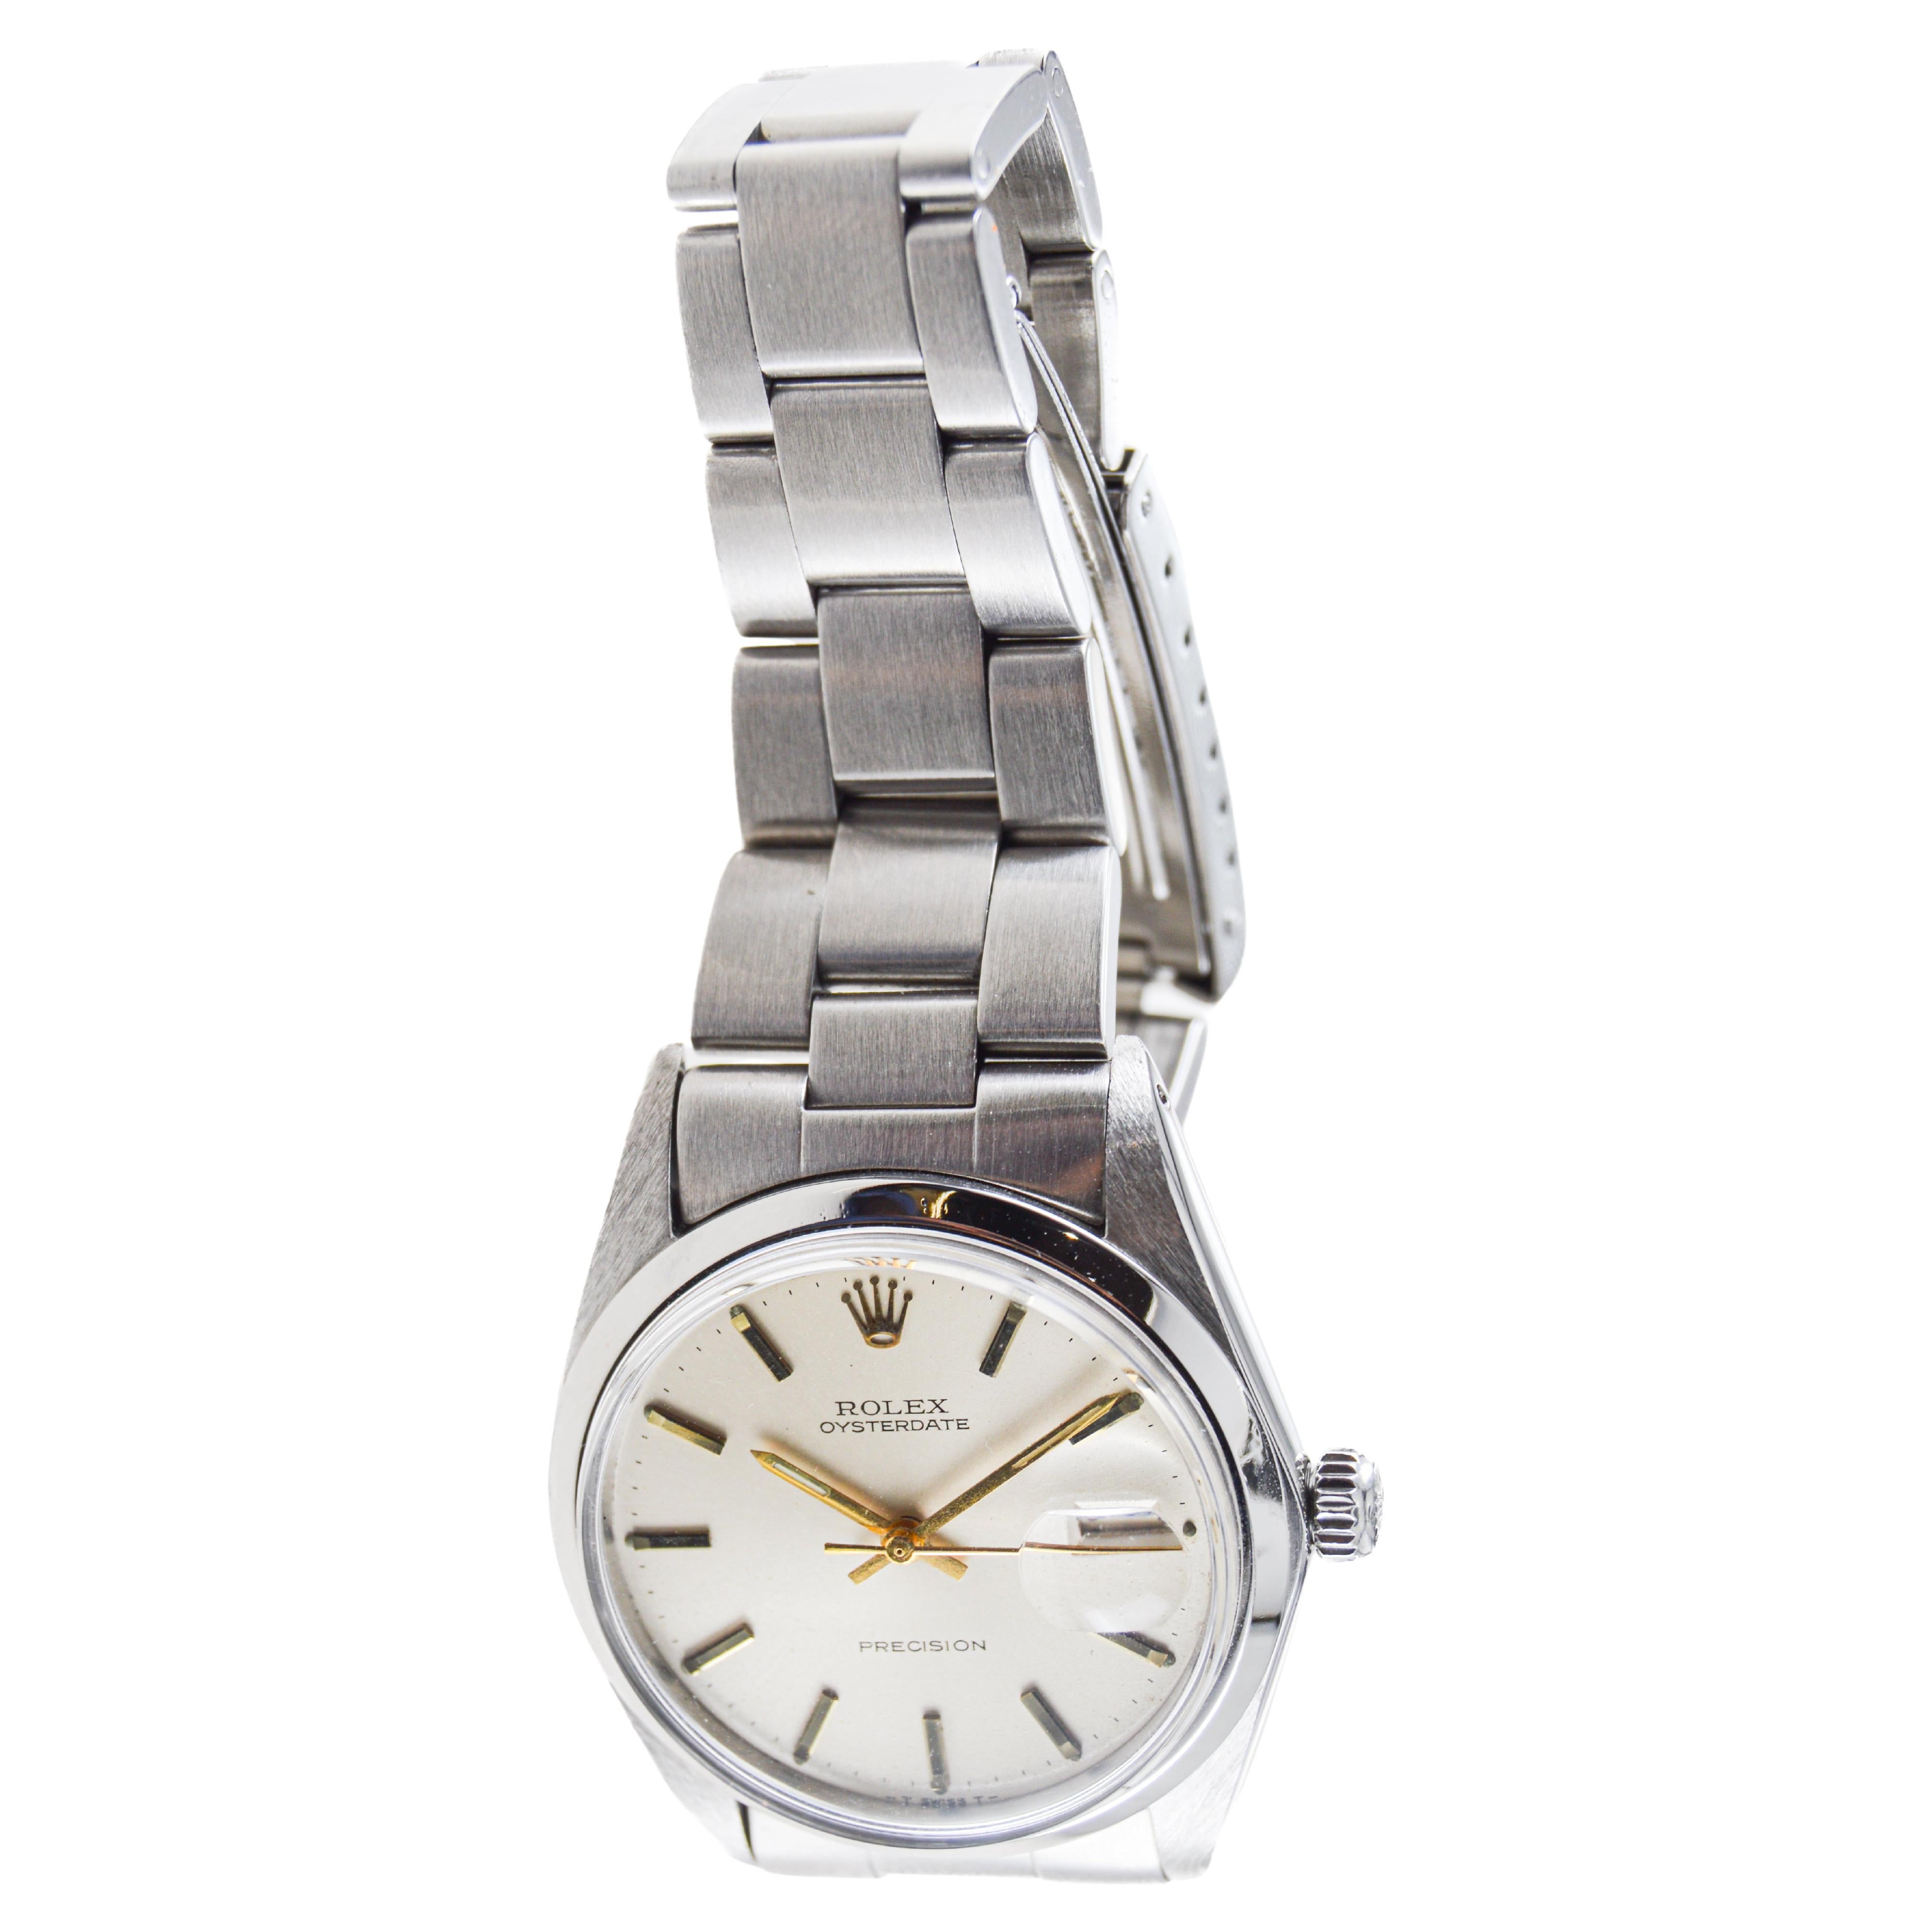 Rolex Stainless Steel Oysterdate with Factory Original Silver Dial circa, 1960's For Sale 2